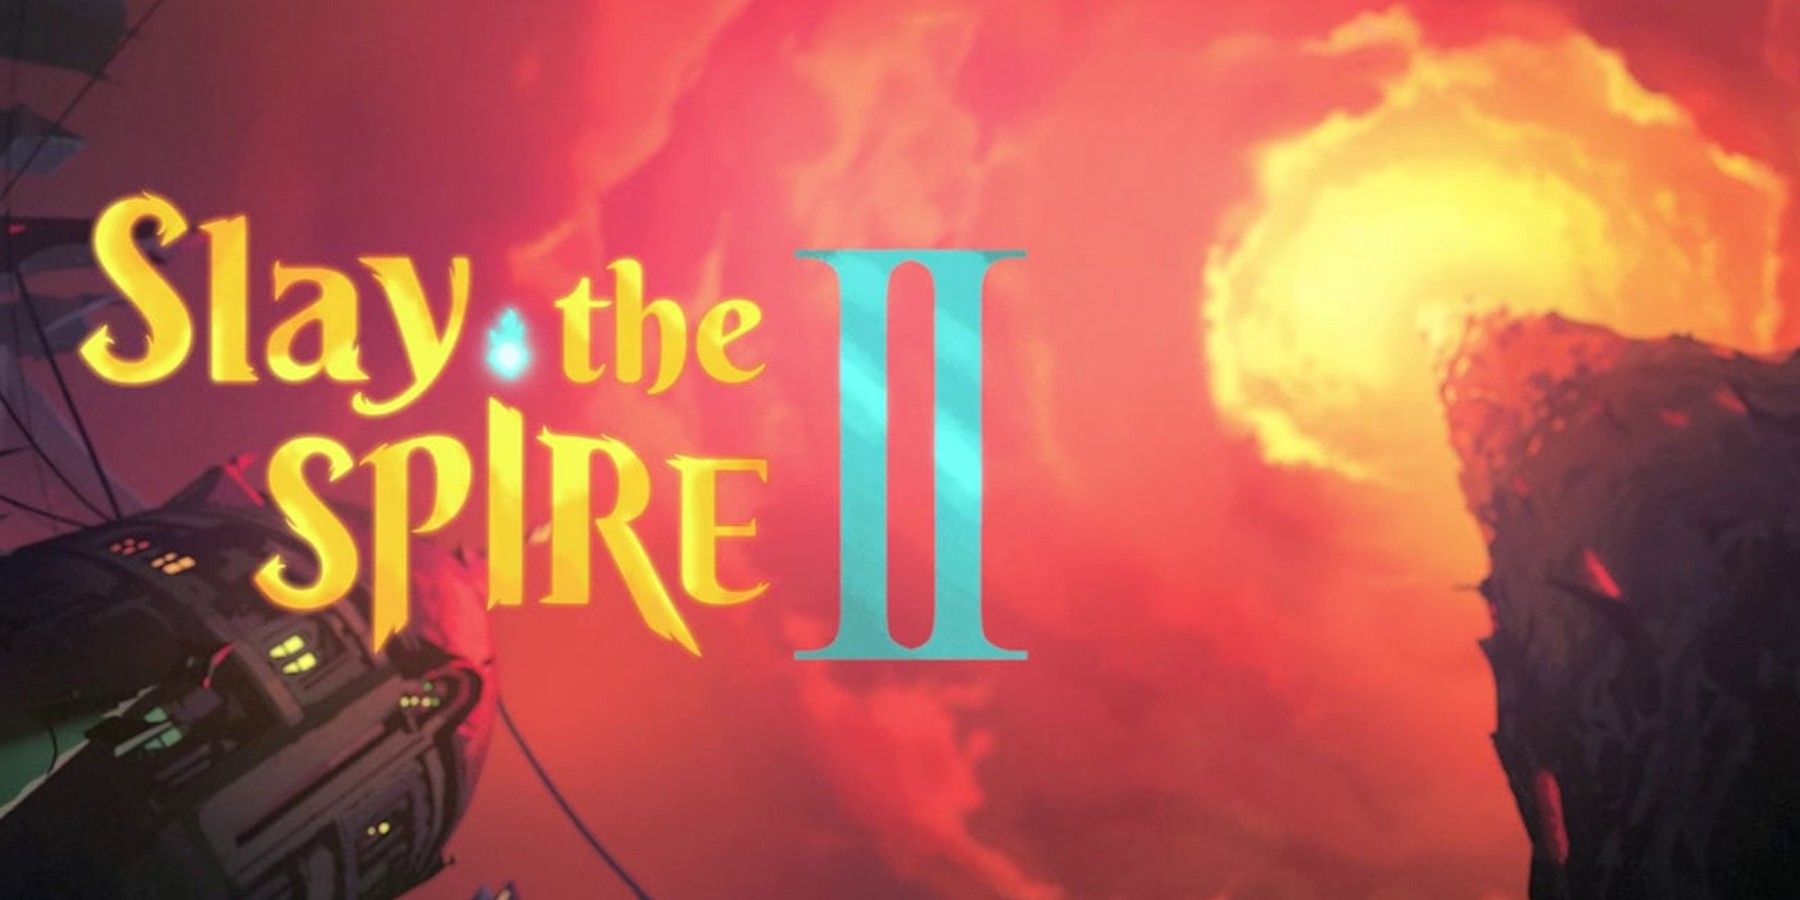 slay the spire trailer screenshot with game title